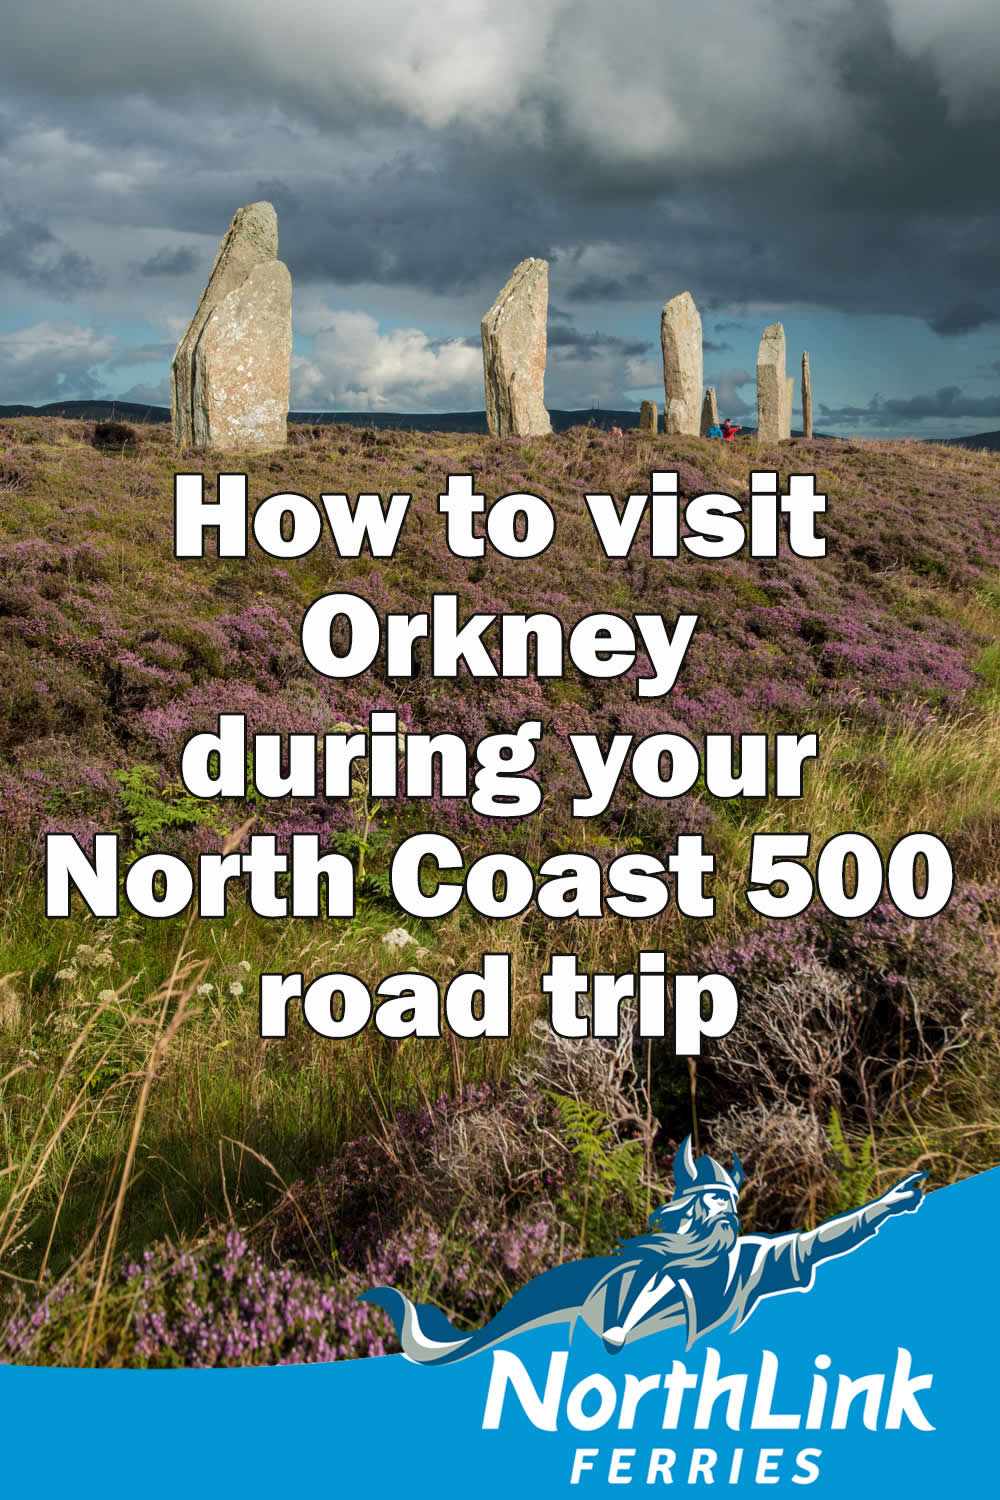 How to visit Orkney during your North Coast 500 road trip